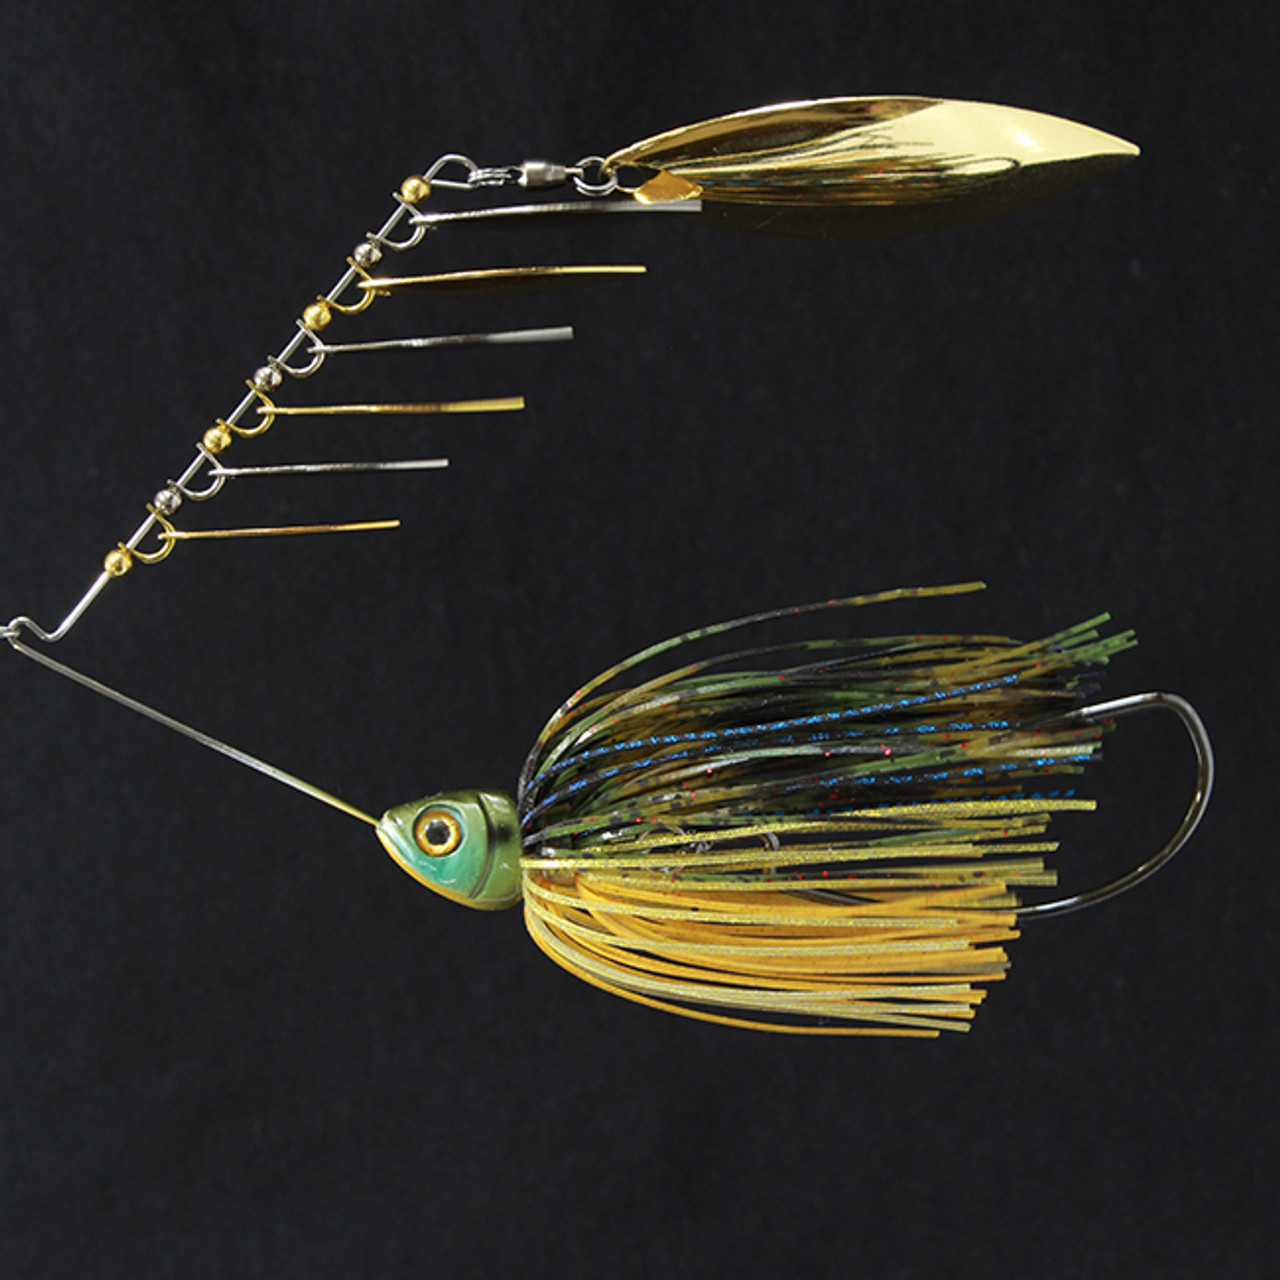 Glamour Shad™ Spinnerbaits - Glamour Shad™